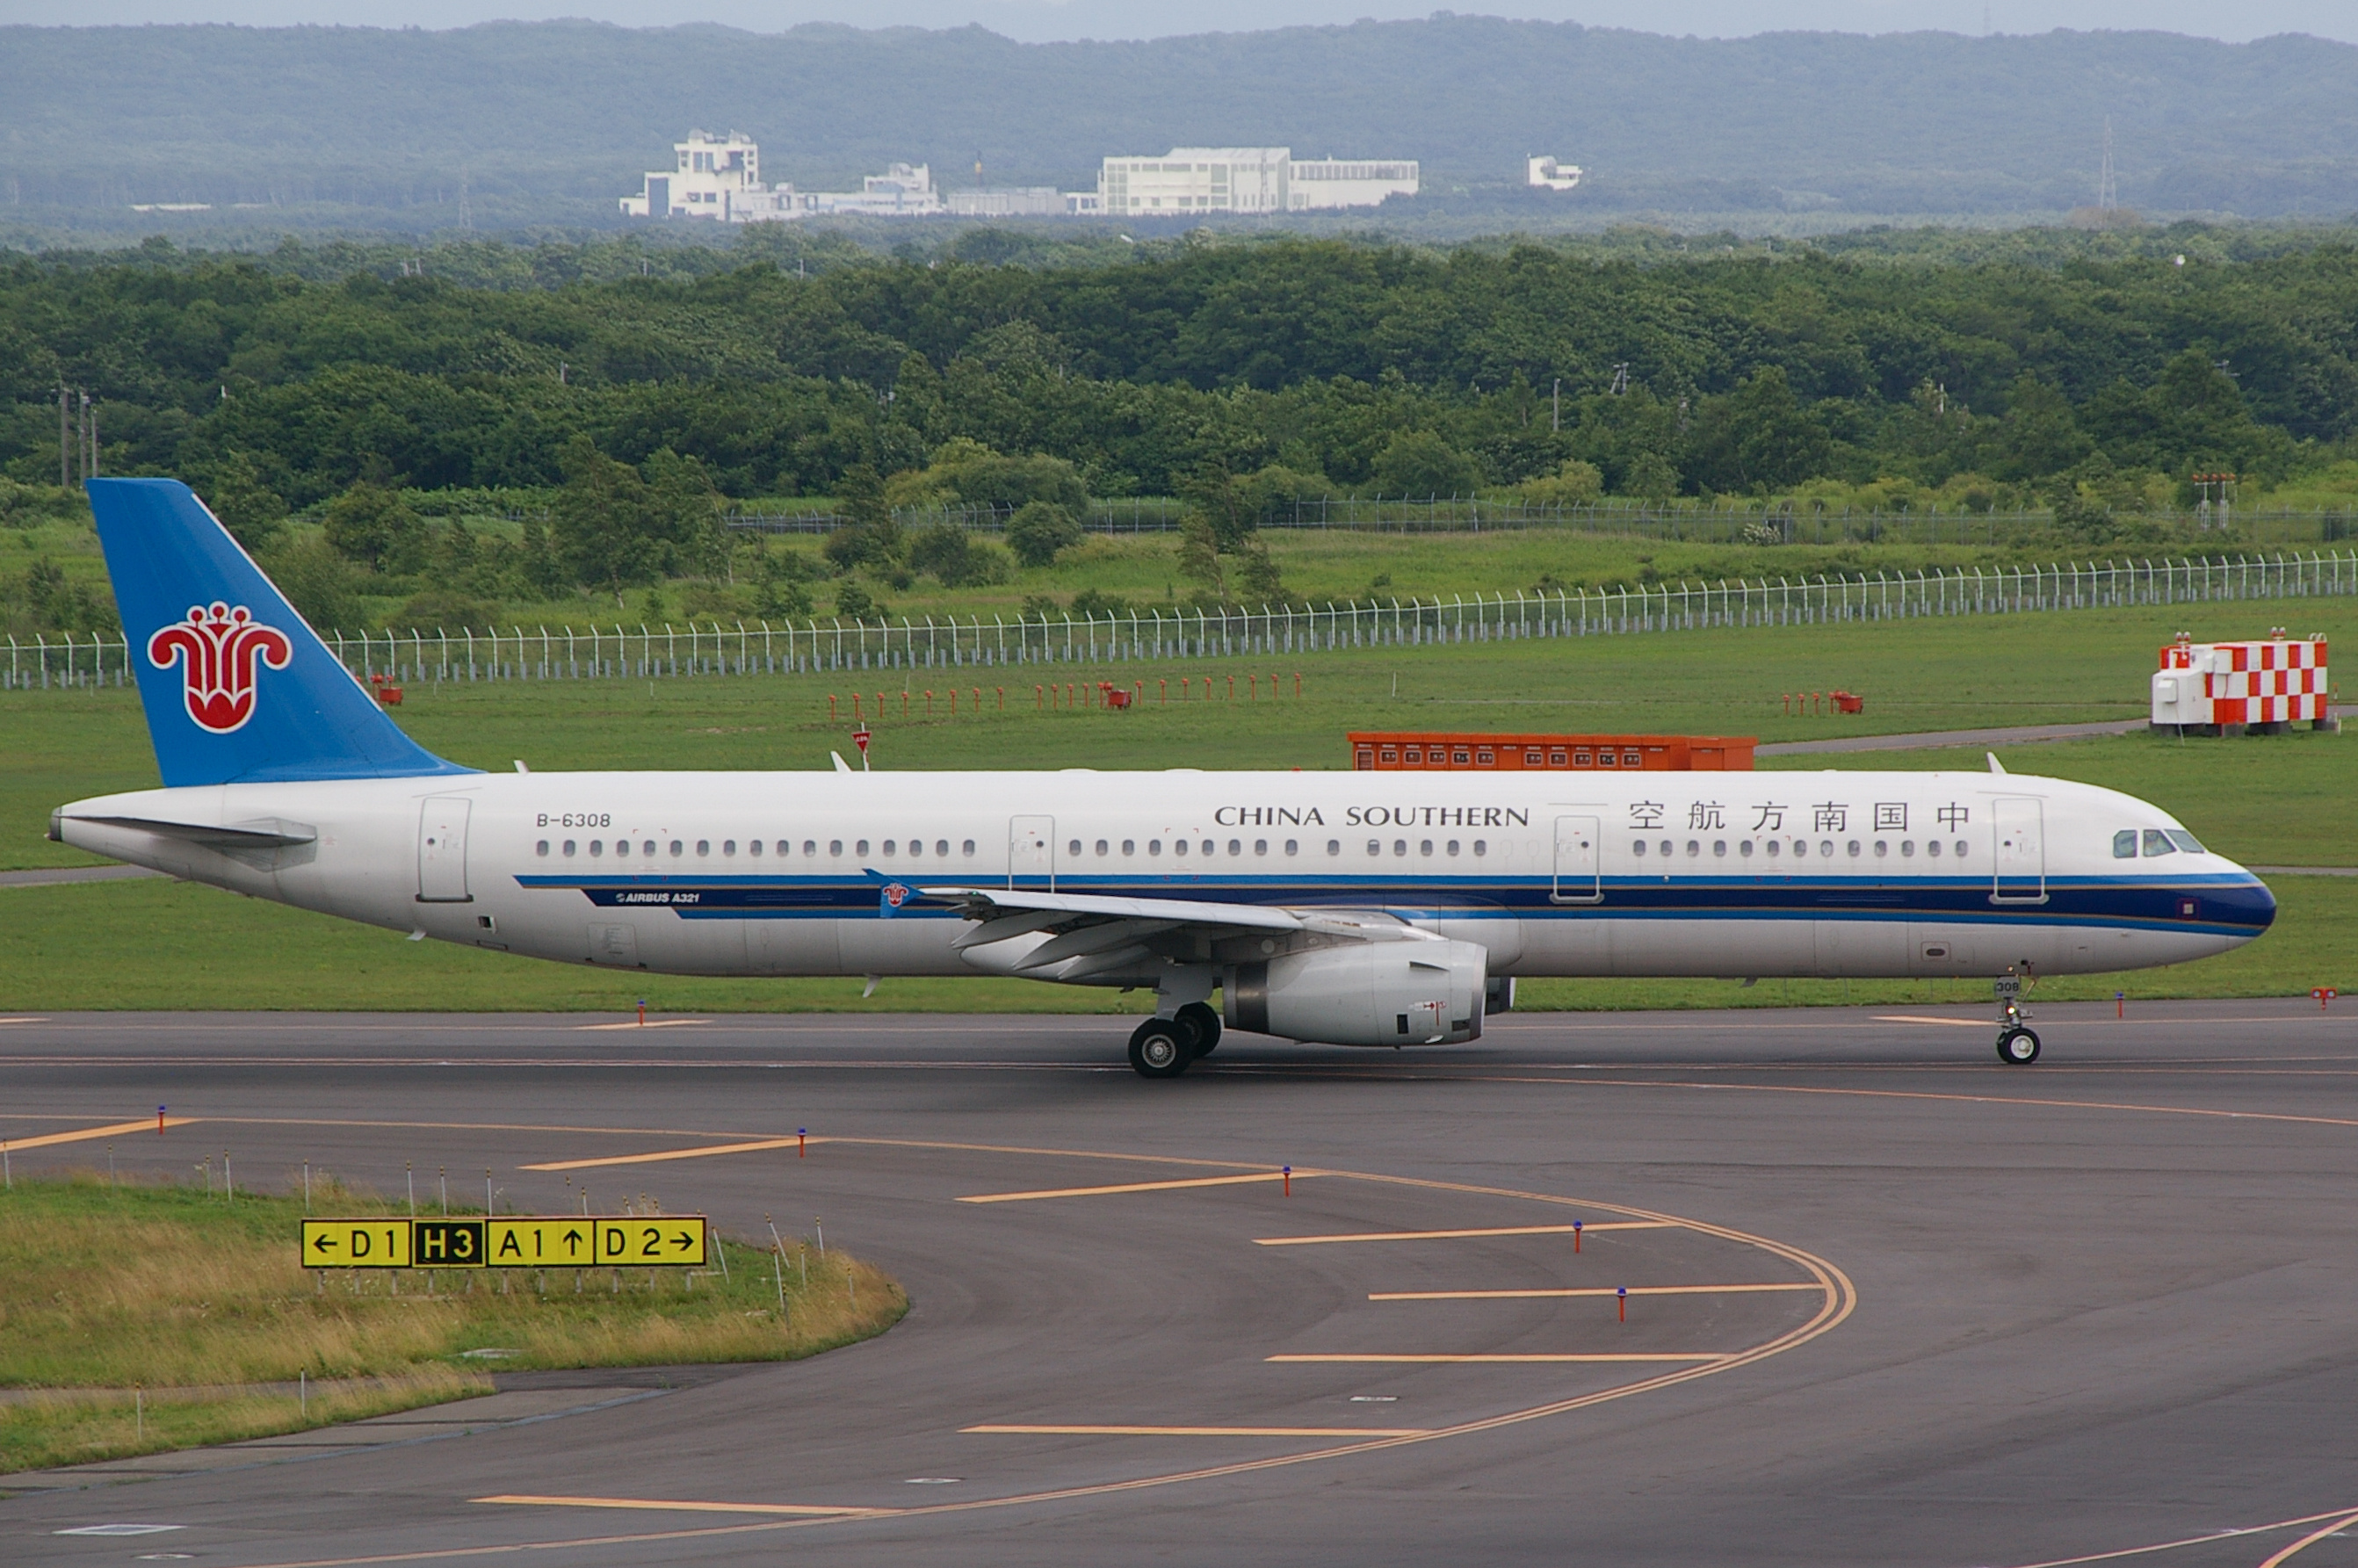 China Southern Airlines, Passenger aircraft, Travel destinations, In-flight service, 2690x1790 HD Desktop